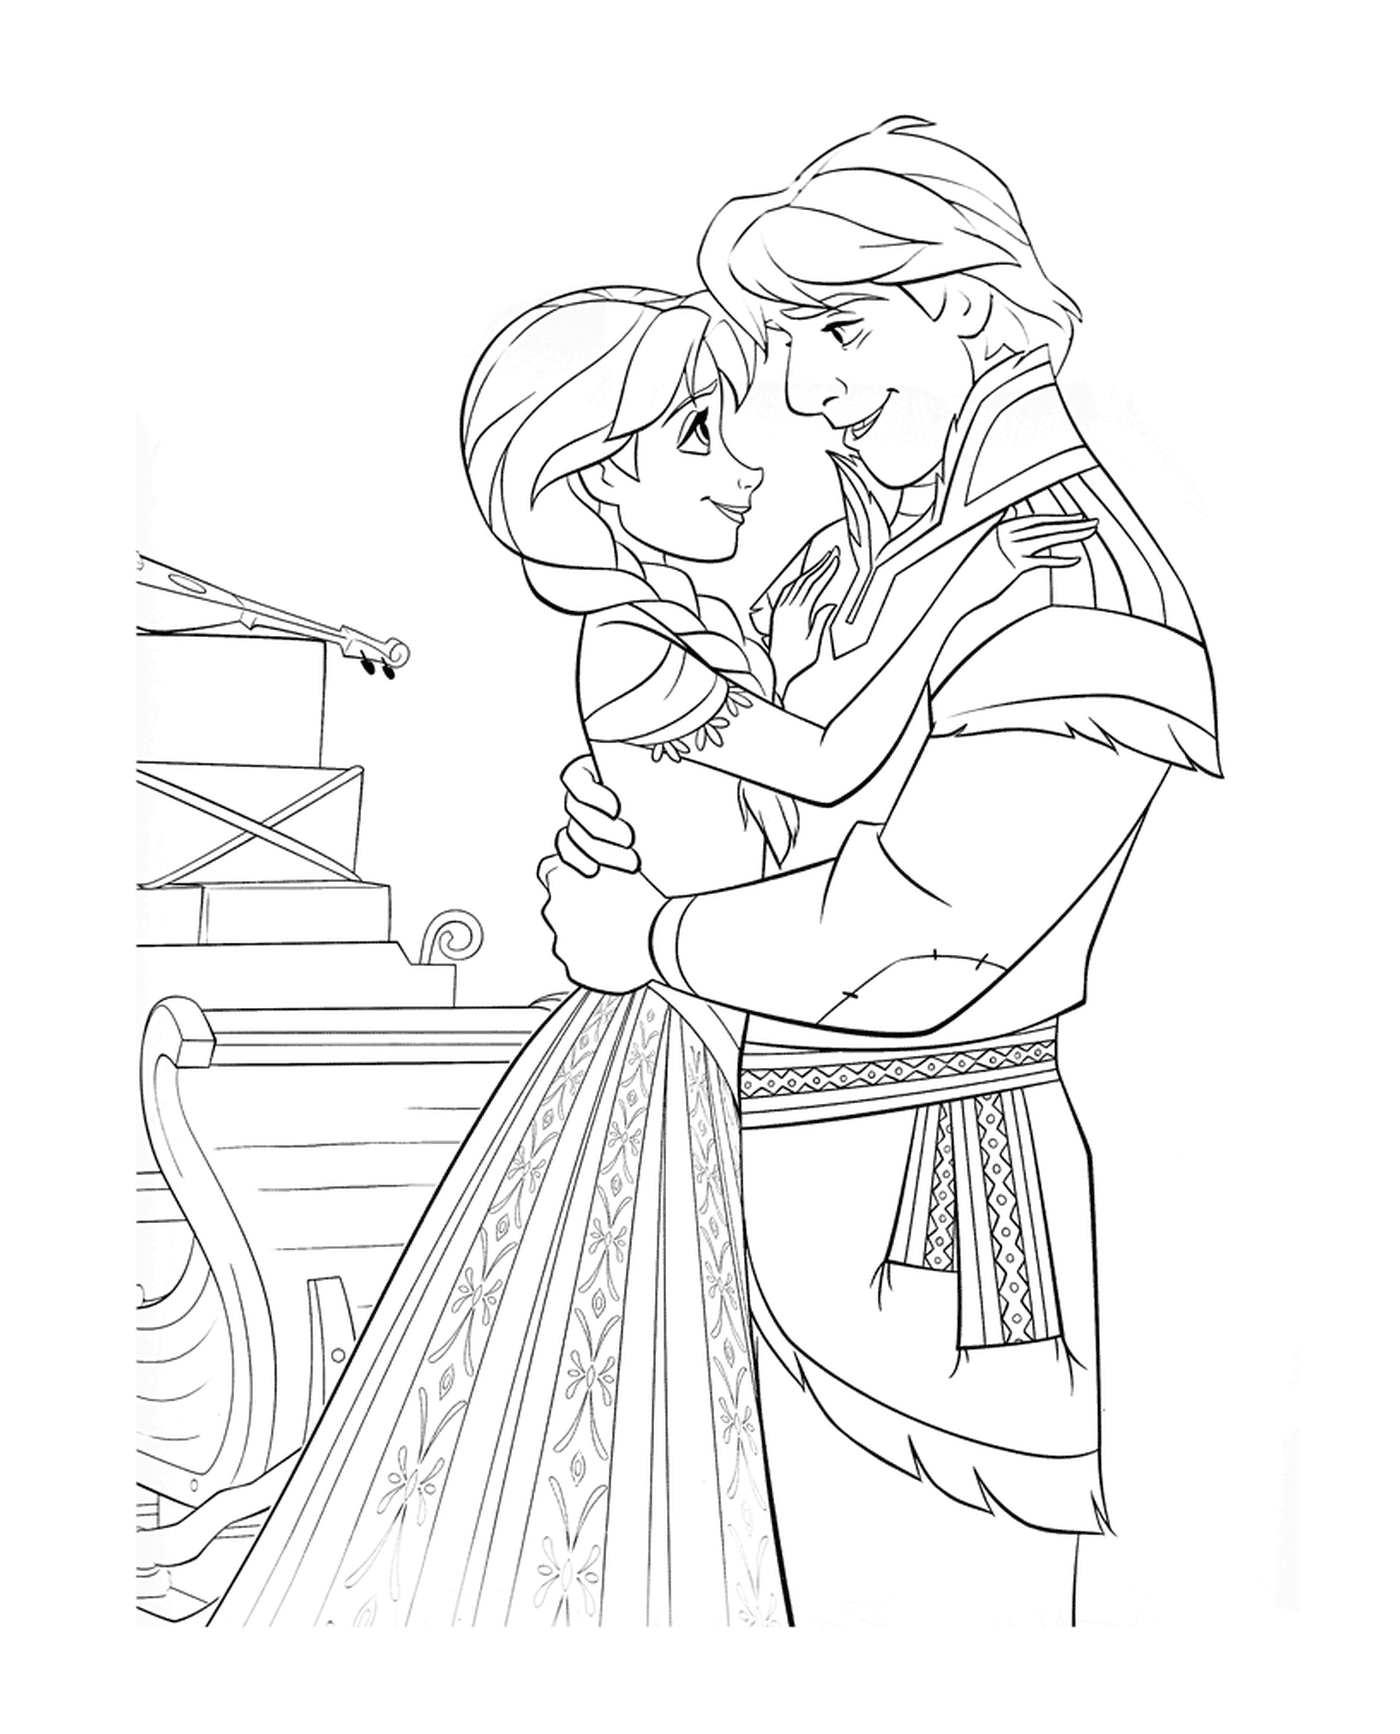  Love between Anna and Kristoff 